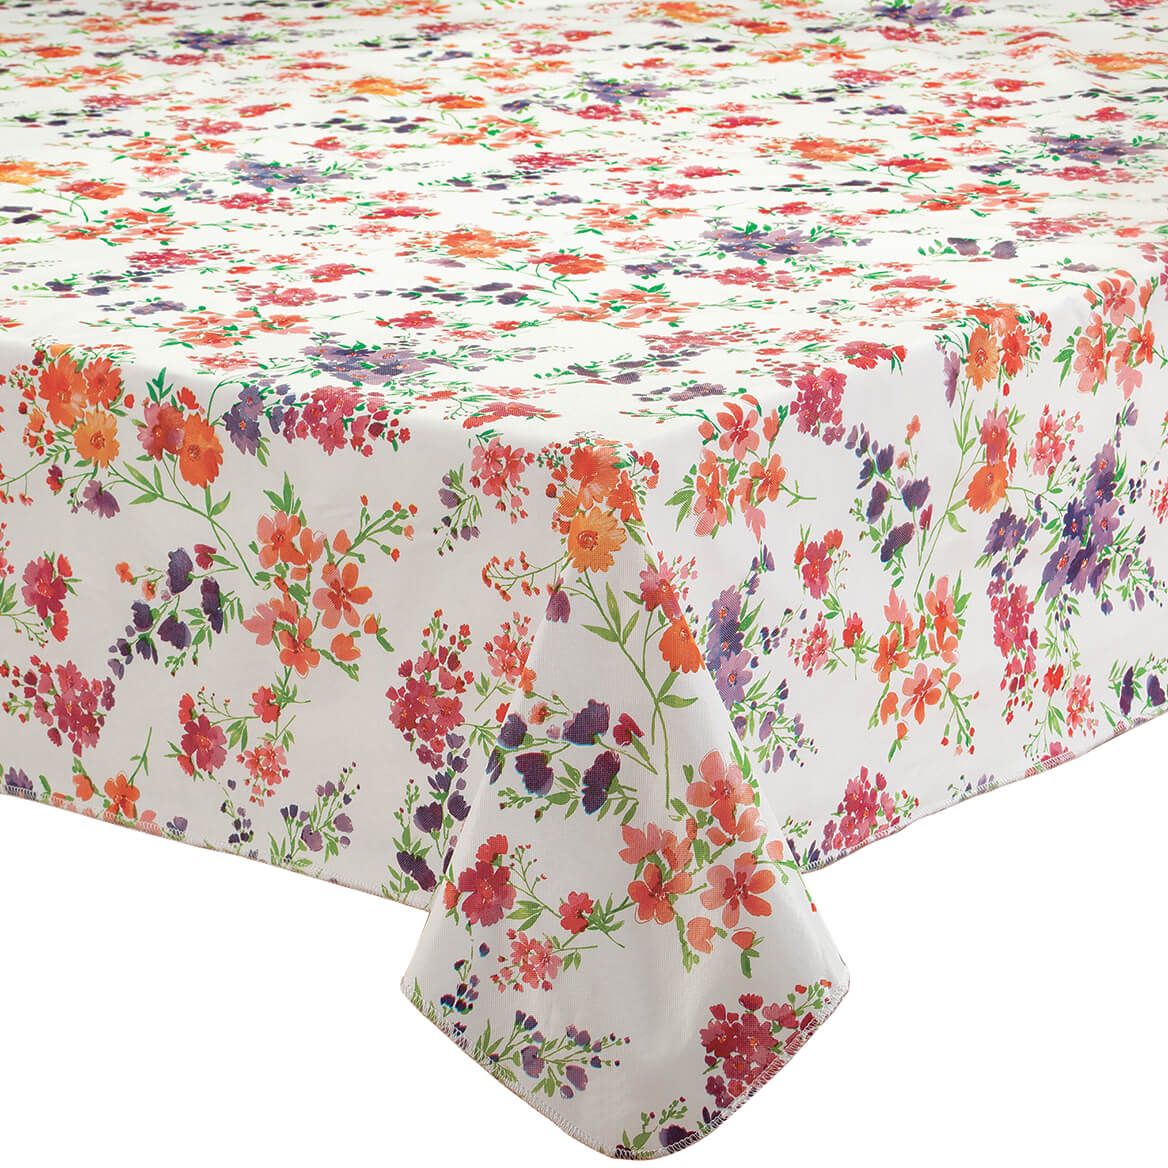 Wildflowers Vinyl Table Cover by Chef's Pride + '-' + 373217